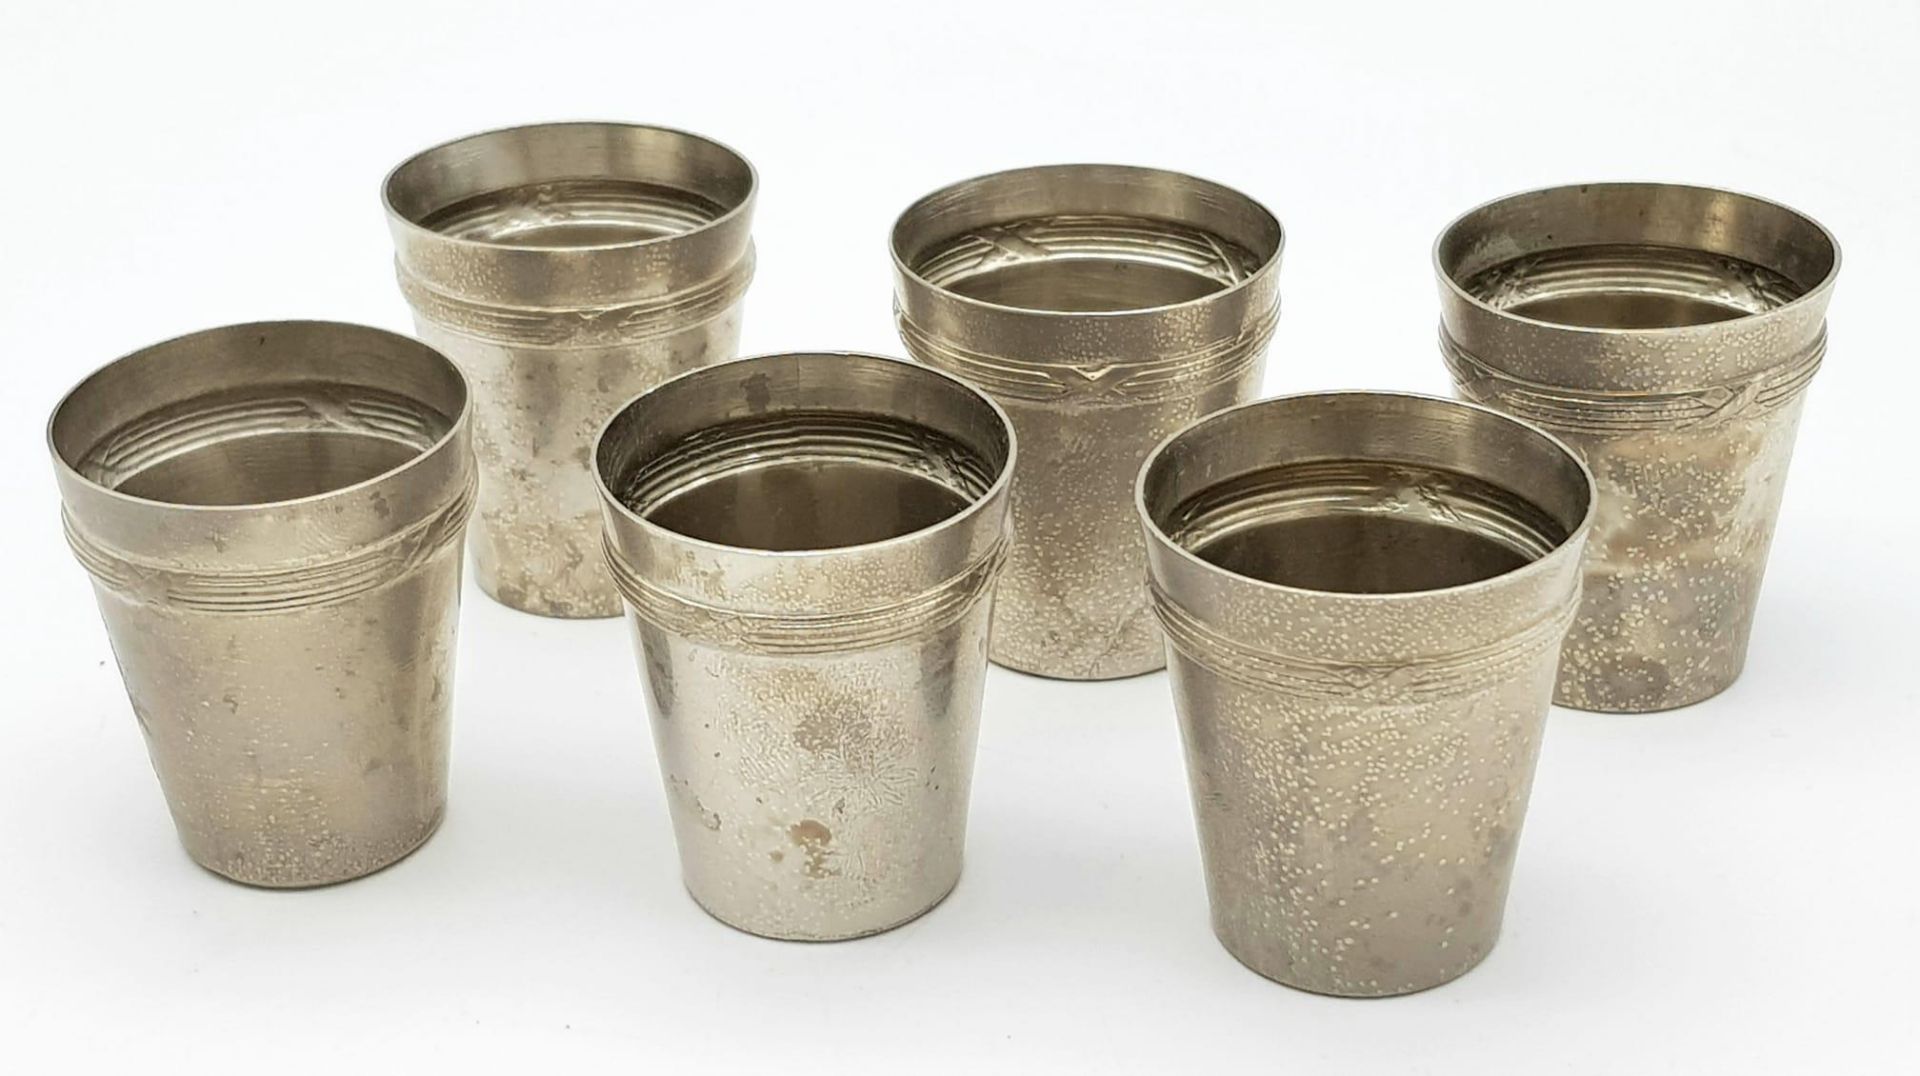 6 x Silver Plated German Gebirgsjäger Division (Mountain Troops) Schnapps Cups. - Image 2 of 5